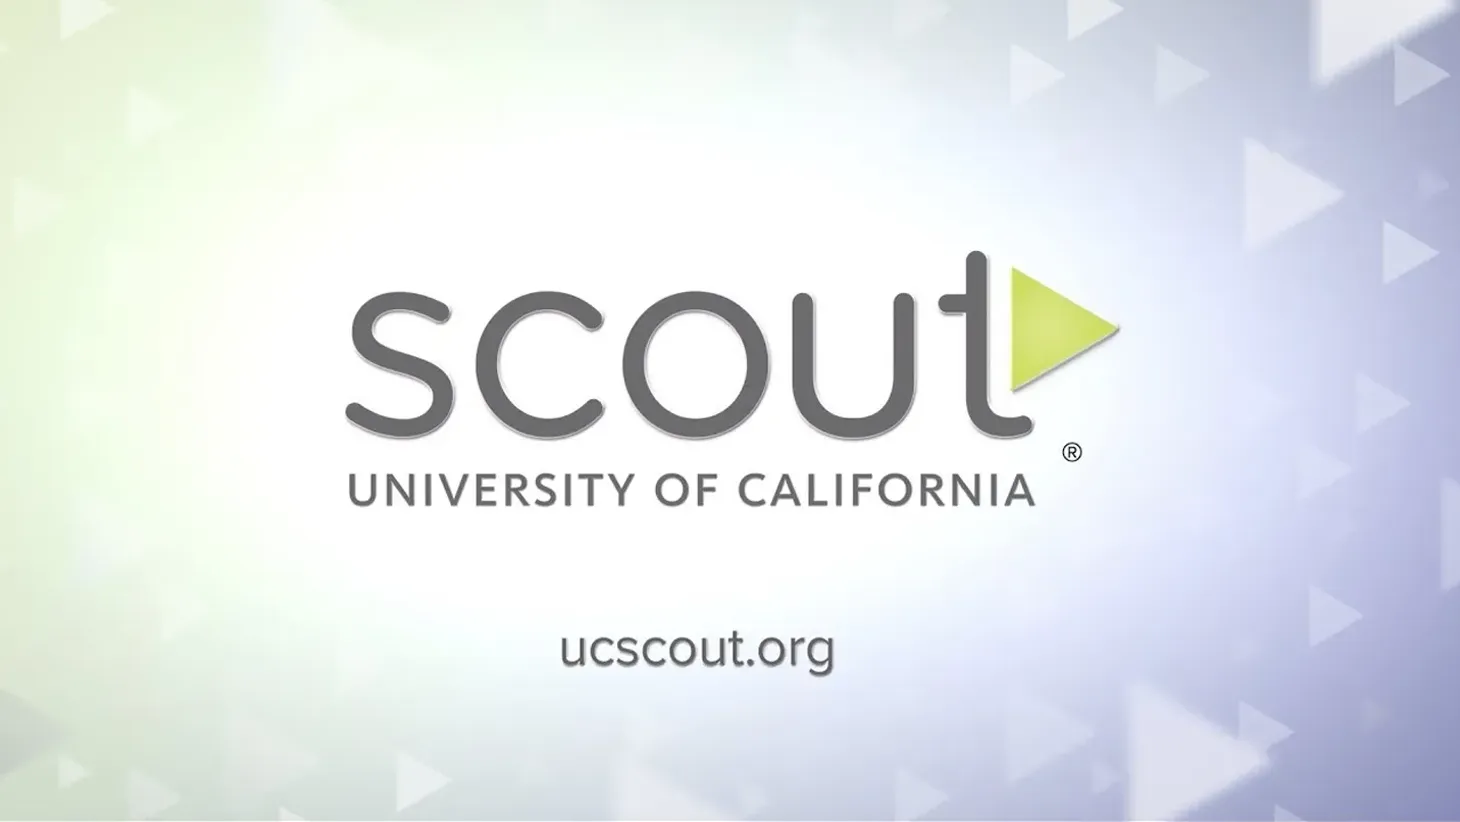 Scout University of California